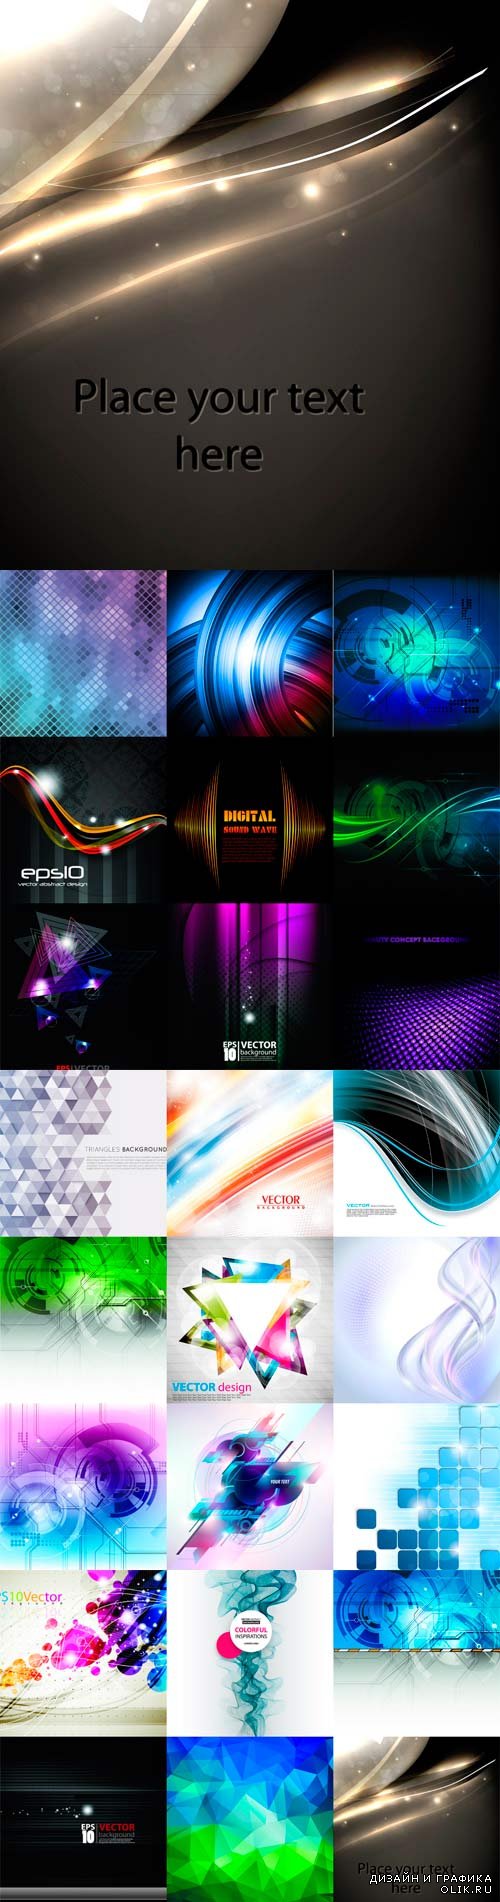 Bright colorful abstract backgrounds vector -25